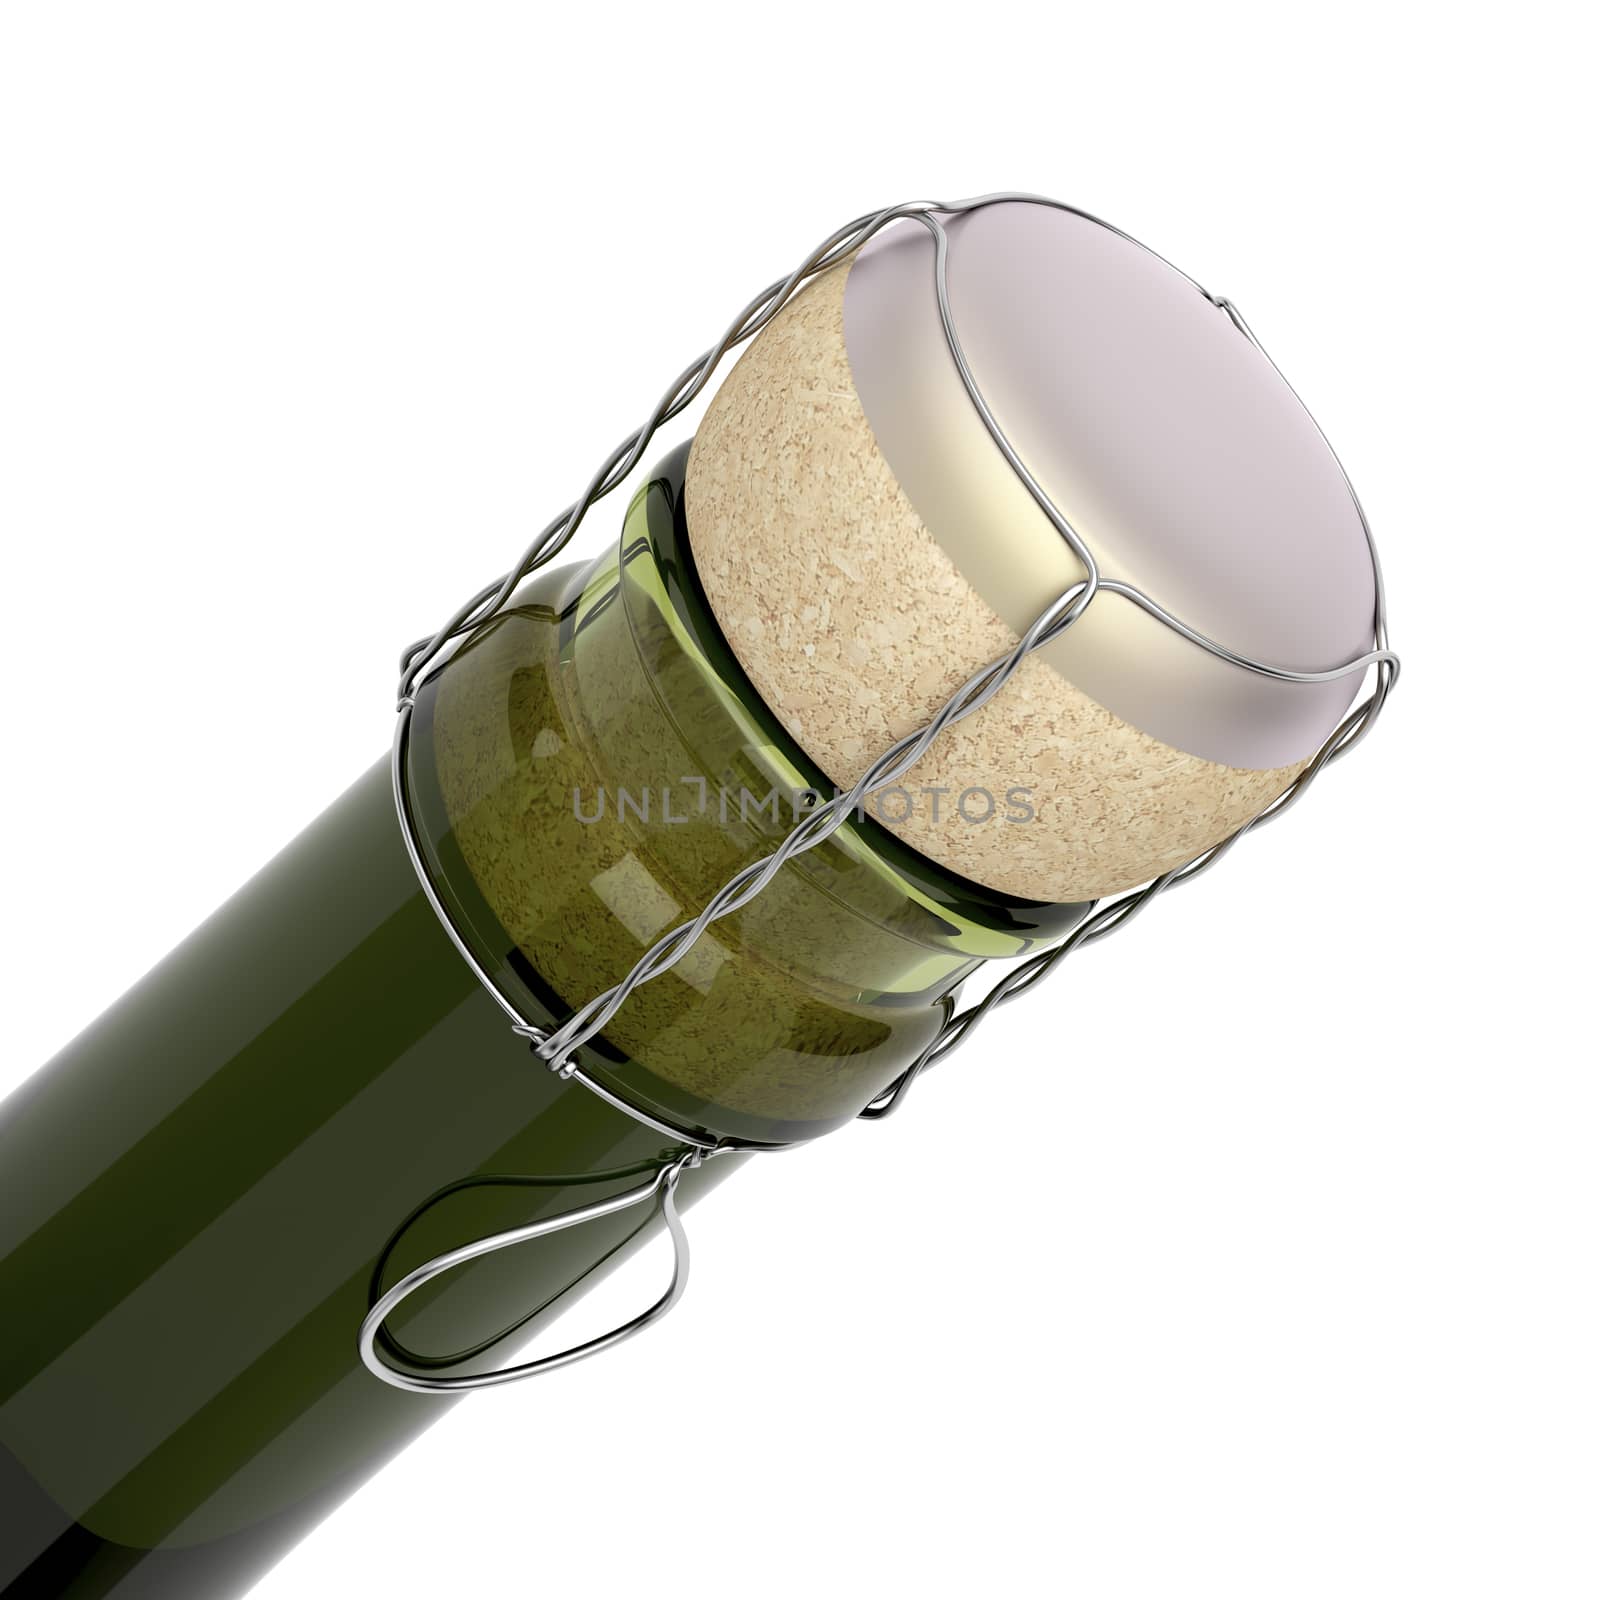 Neck of a bottle of champagne with a closed cork, isolated on white background